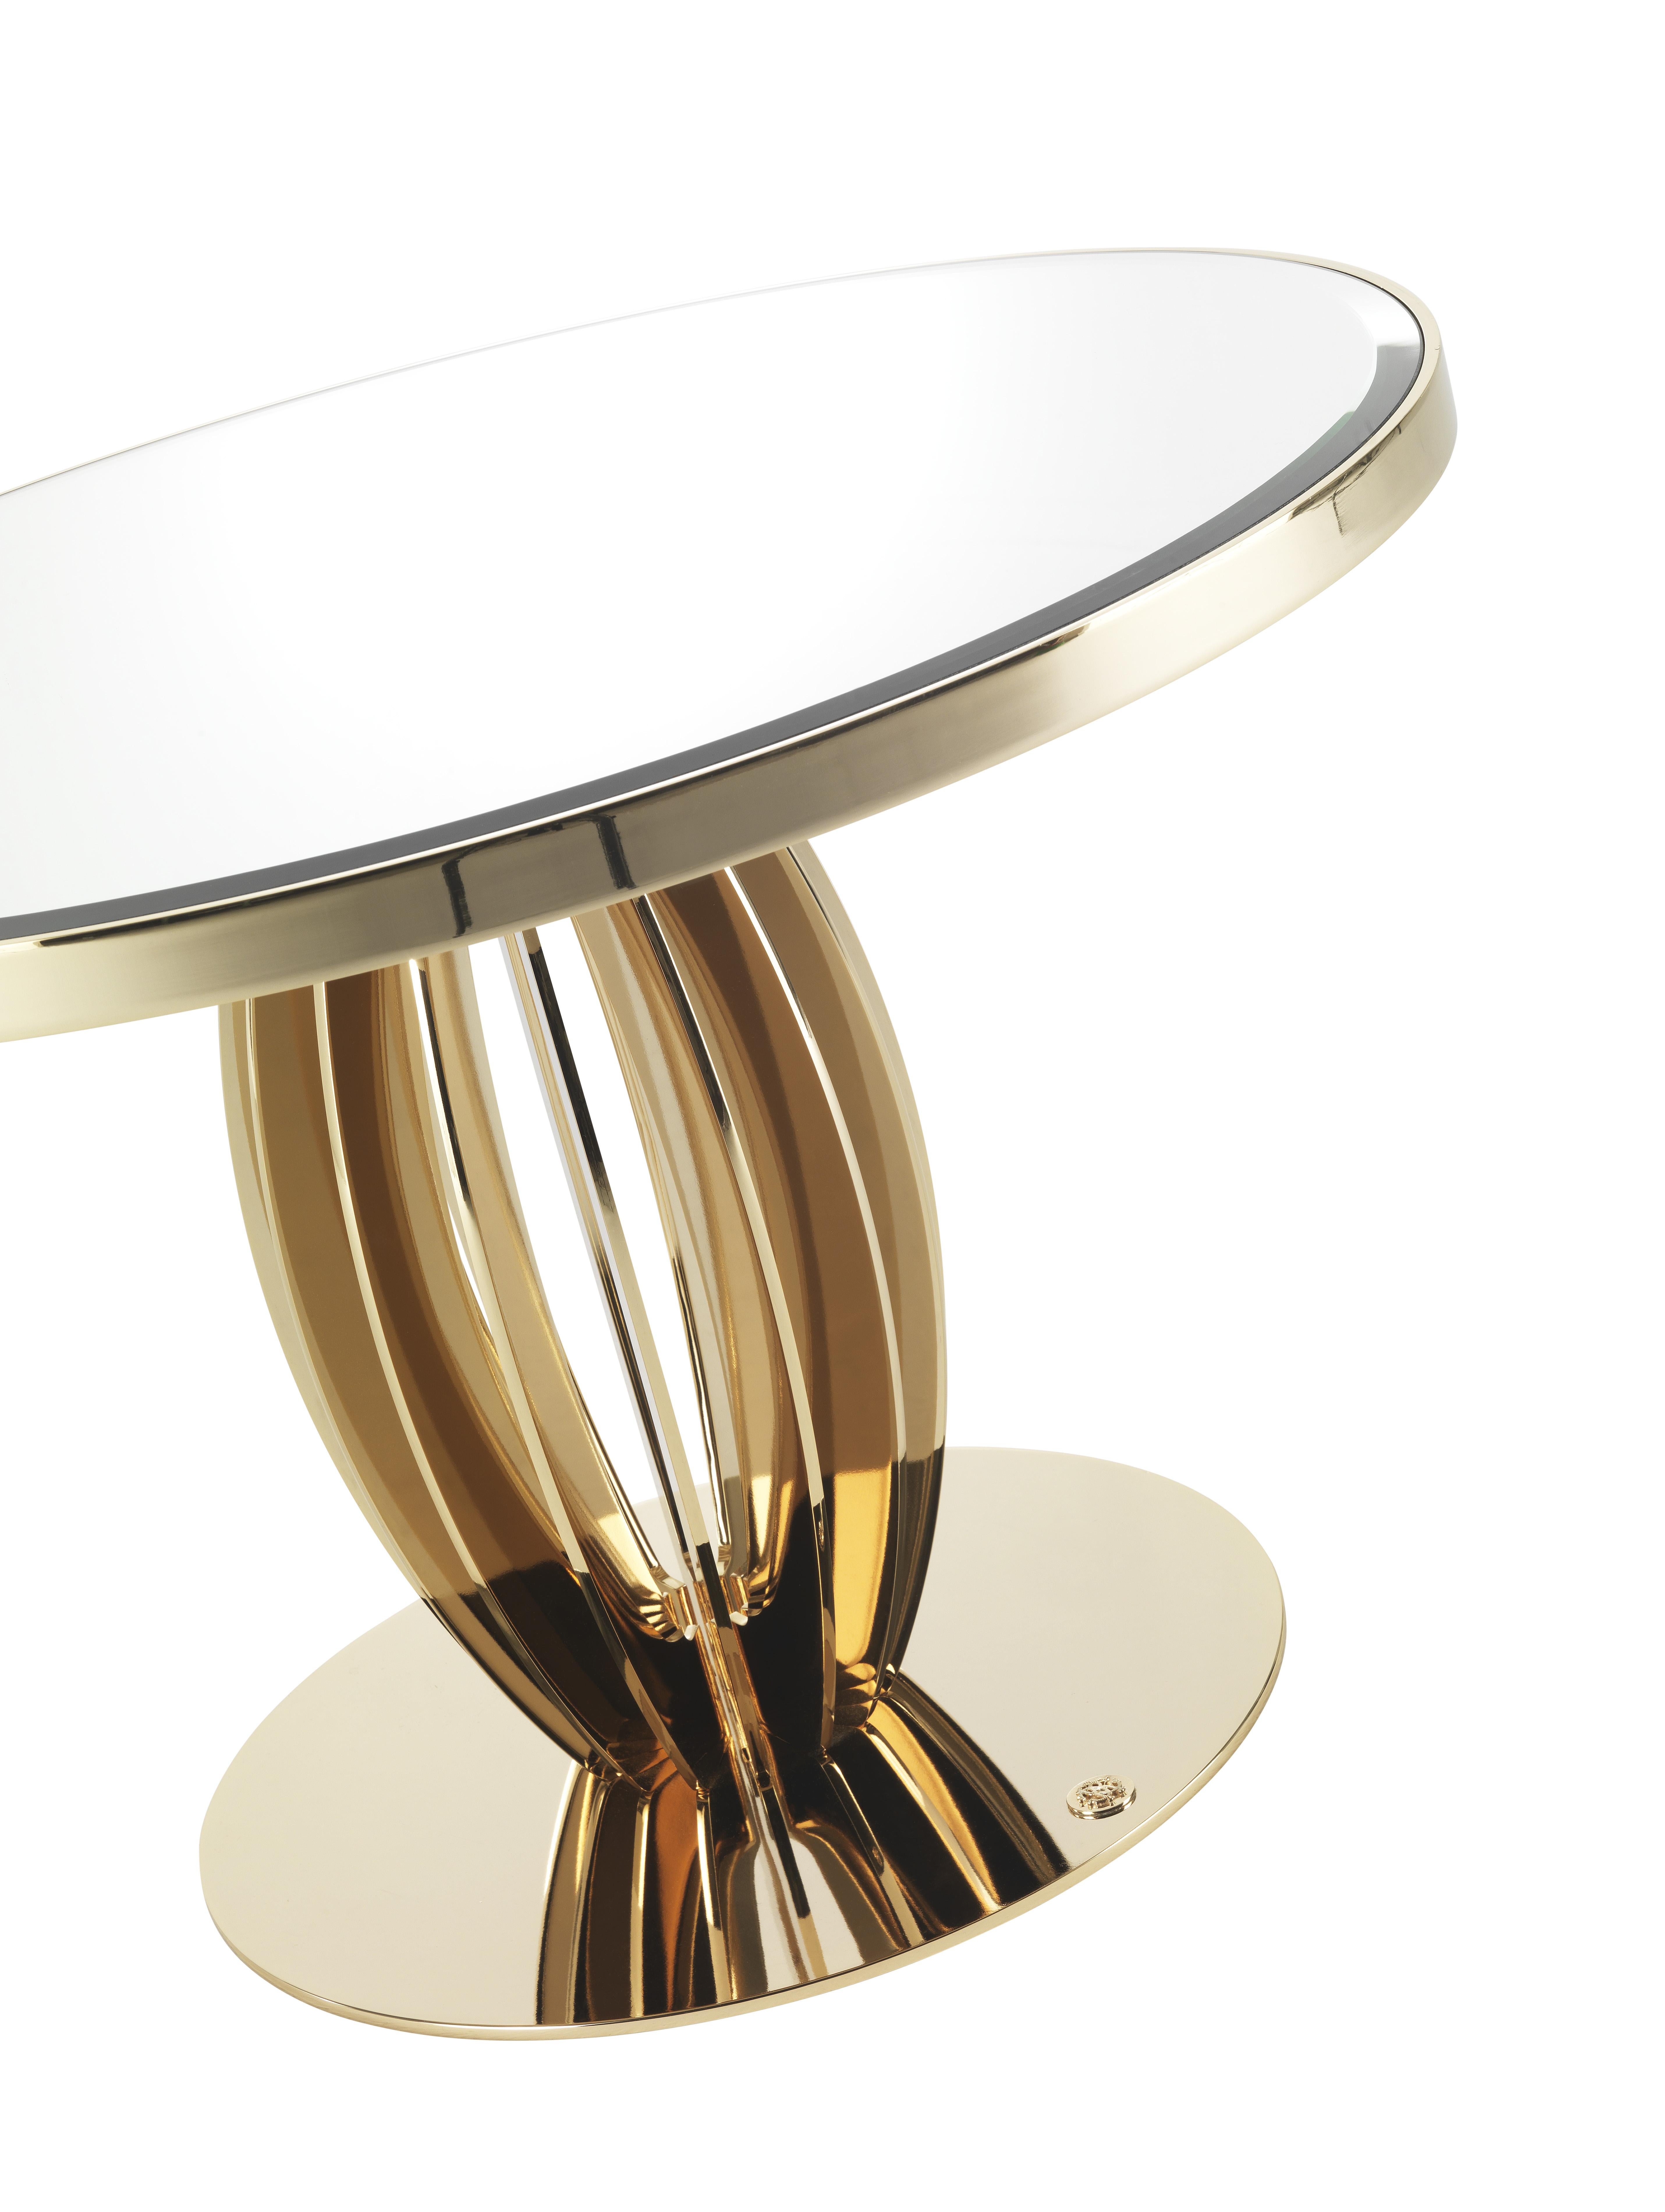 Pumpkin Side table structure in gold metal finishing. Top with bevelled natural mirror.
 